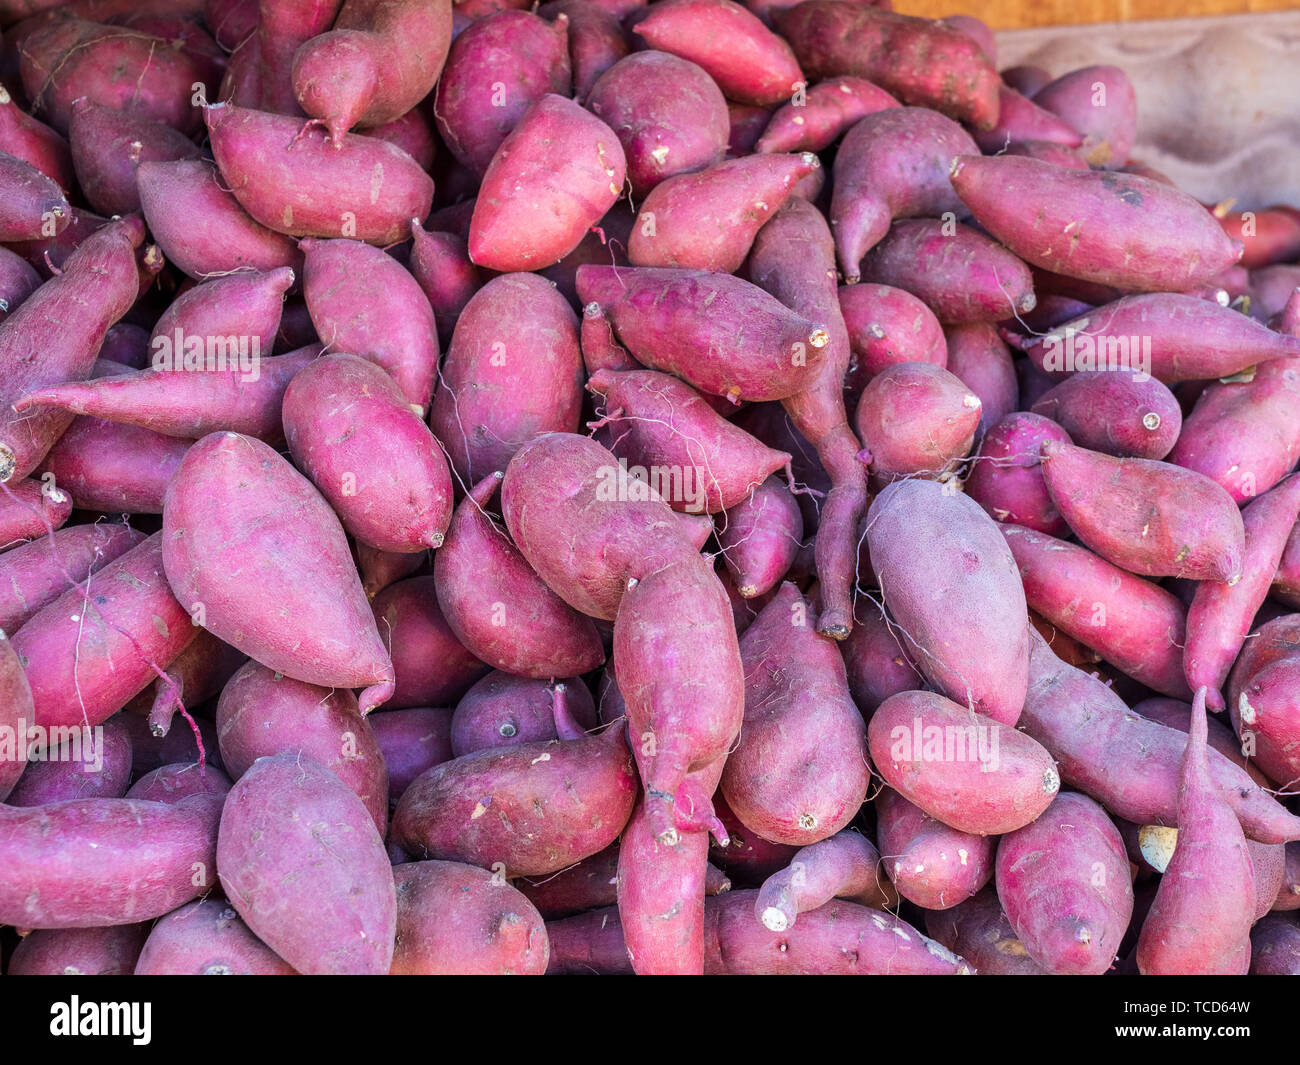 Pile of fresh yams at farmer market for sale Stock Photo